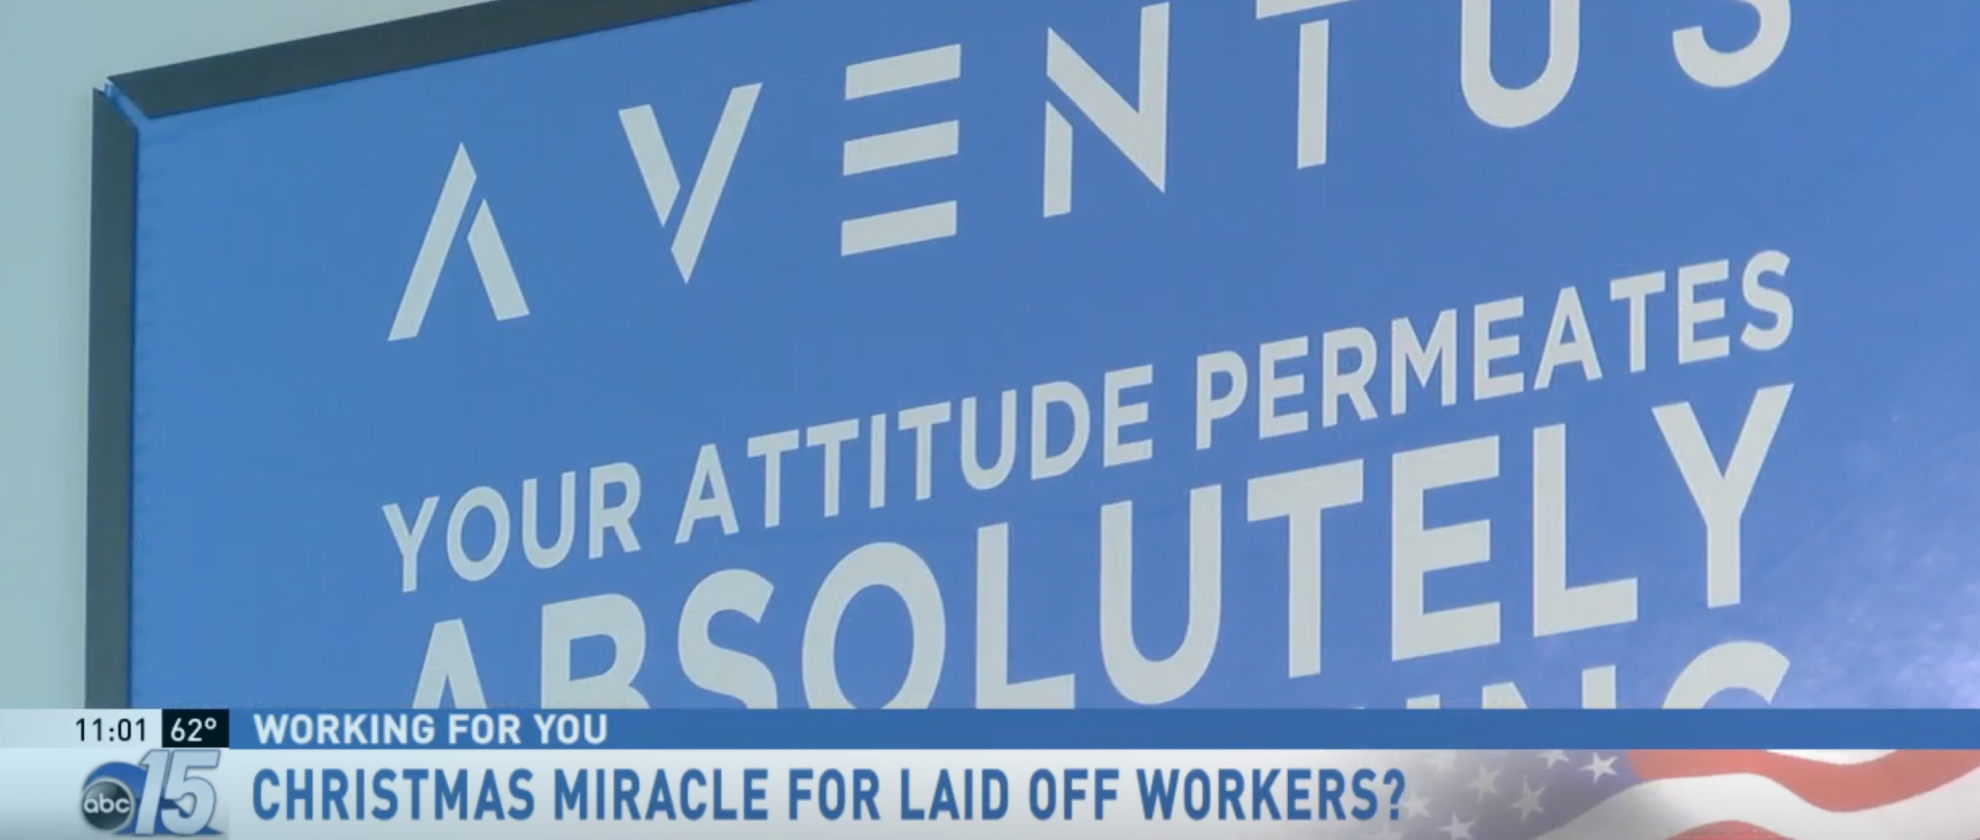 Screen capture of an abc news mention of Aventus. On screen, a company banner with the logo shows the phrase 'Your Attitude Permeates Absolutely Everything'. An overlayed header displays: 'Christmas Miracle for Laid Off Workers?'